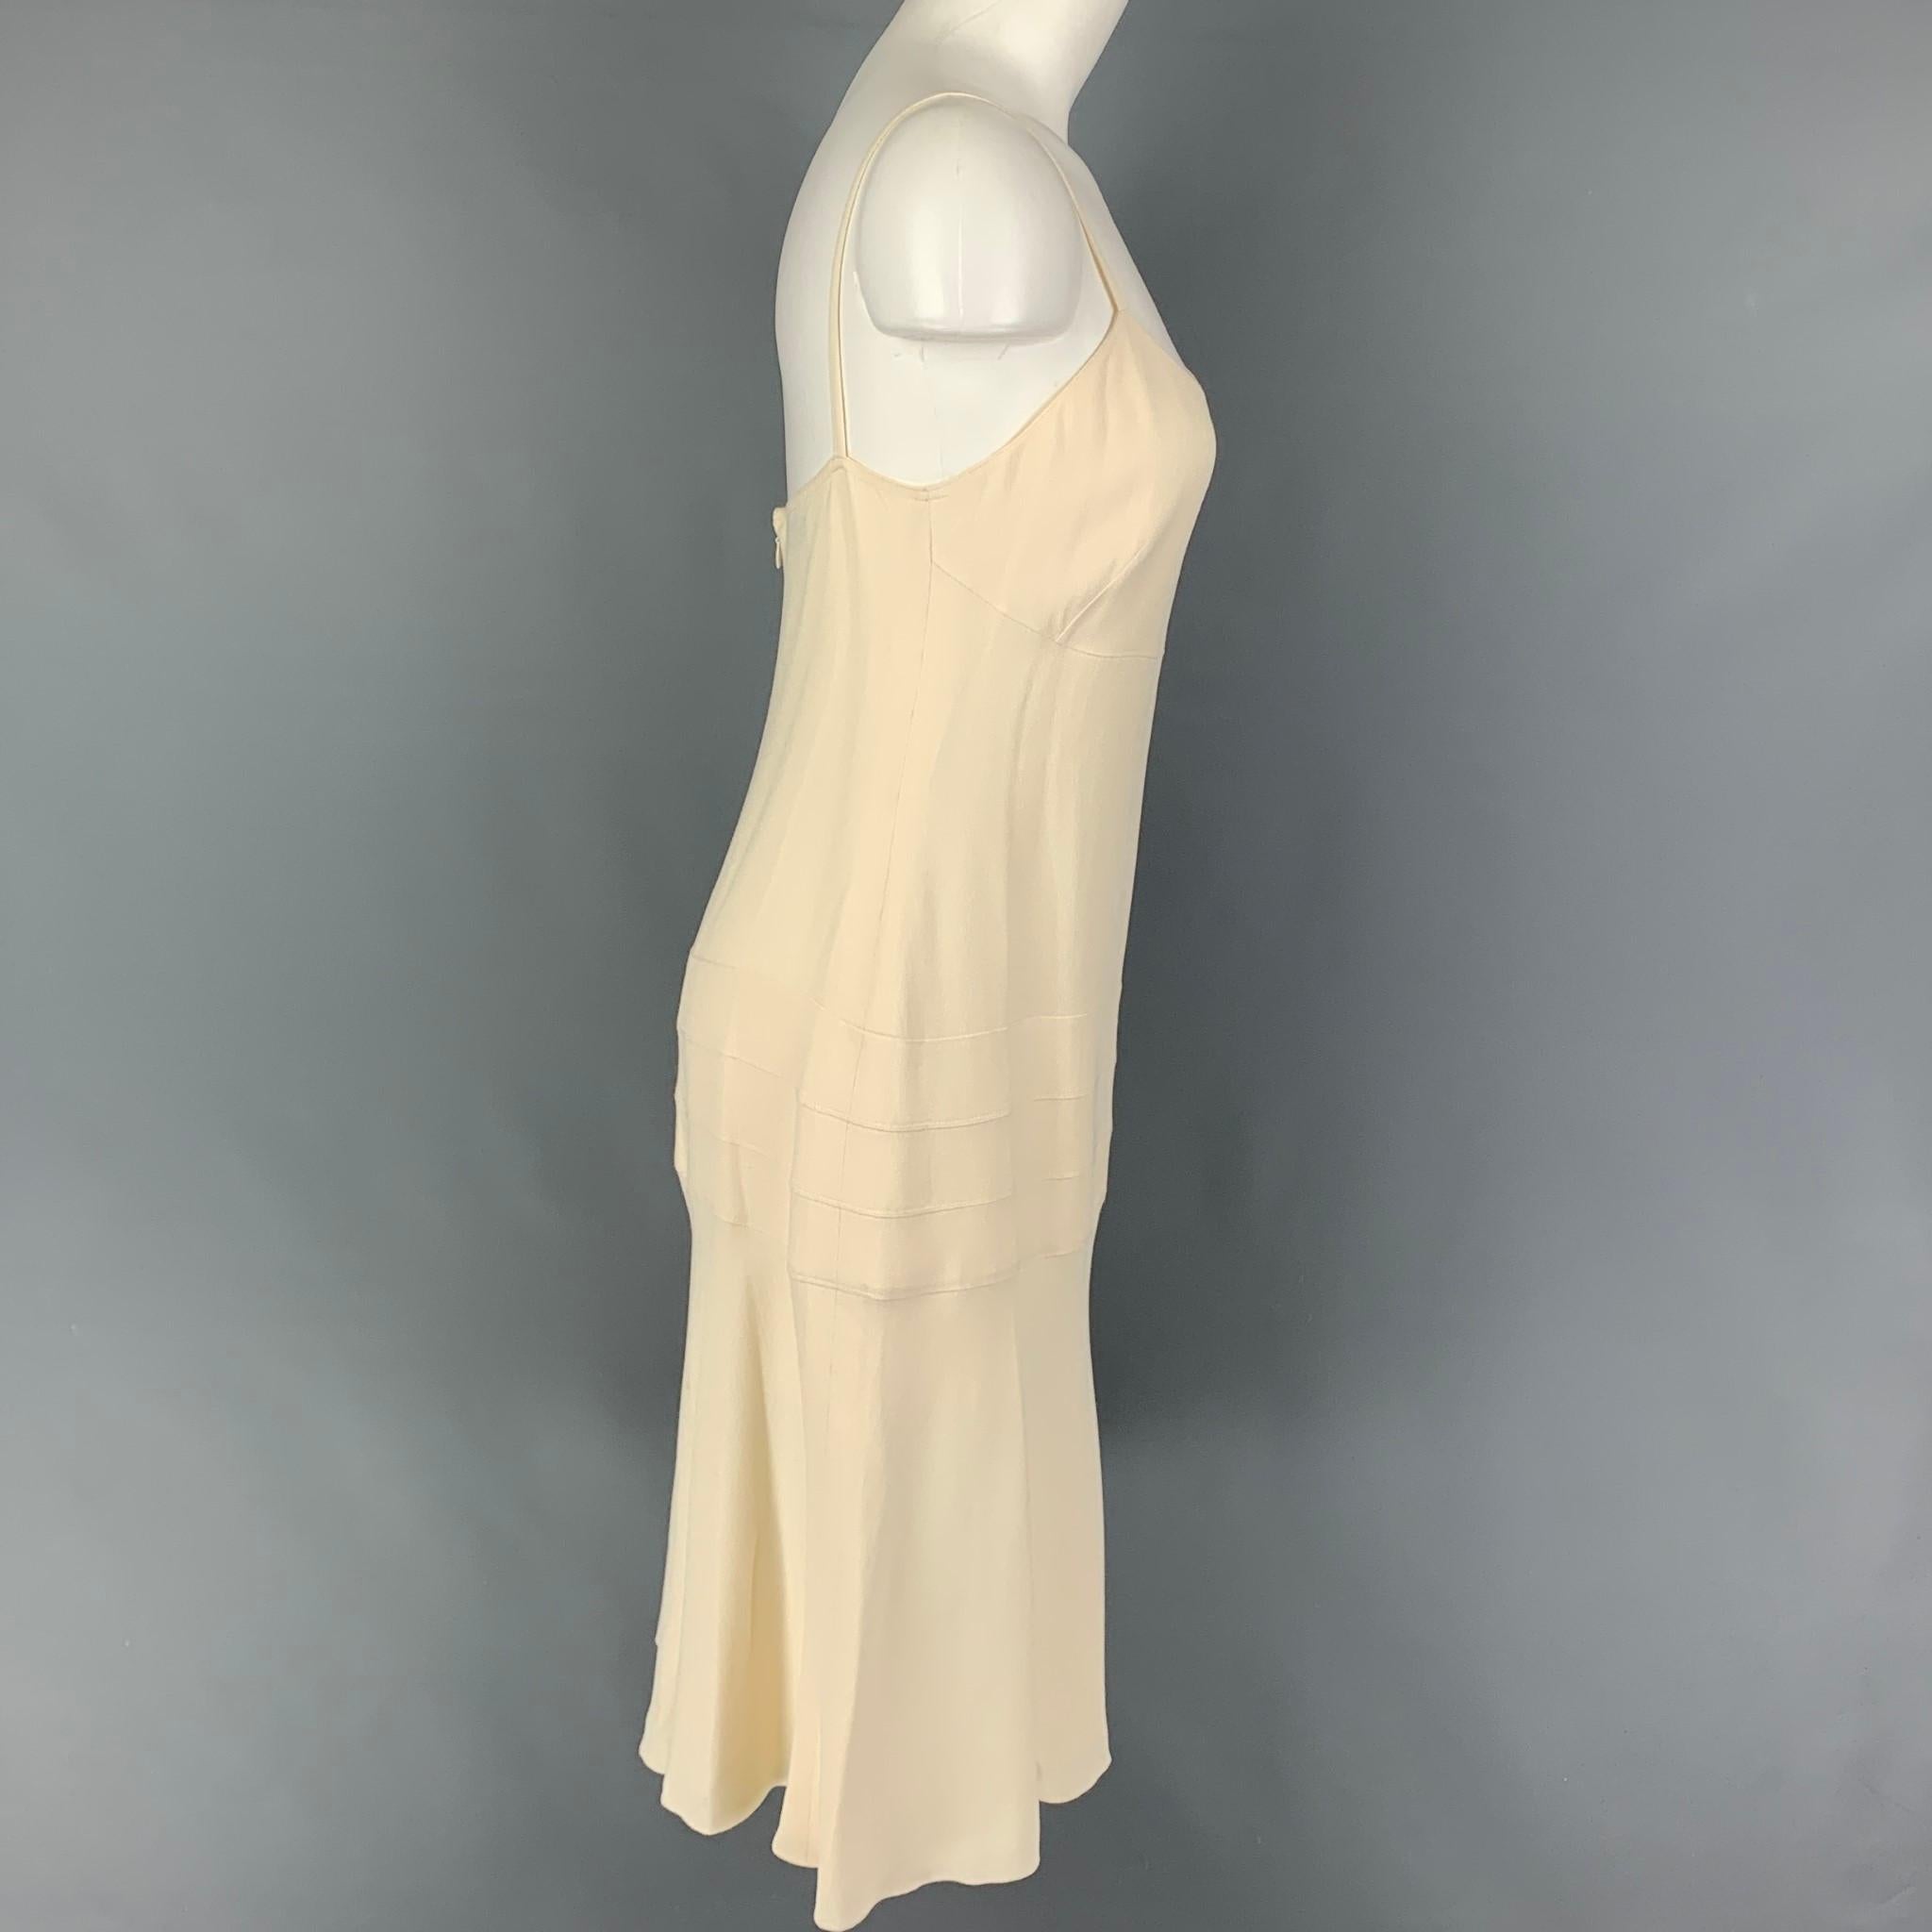 CHANEL 2003 dress comes in a cream crepe acetate / viscose featuring spaghetti straps, small silver tone logo emblem, and a back zipper closure. Made in France. 

Very Good Pre-Owned Condition.
Marked: 03P / AI284 42

Measurements:

Bust: 32